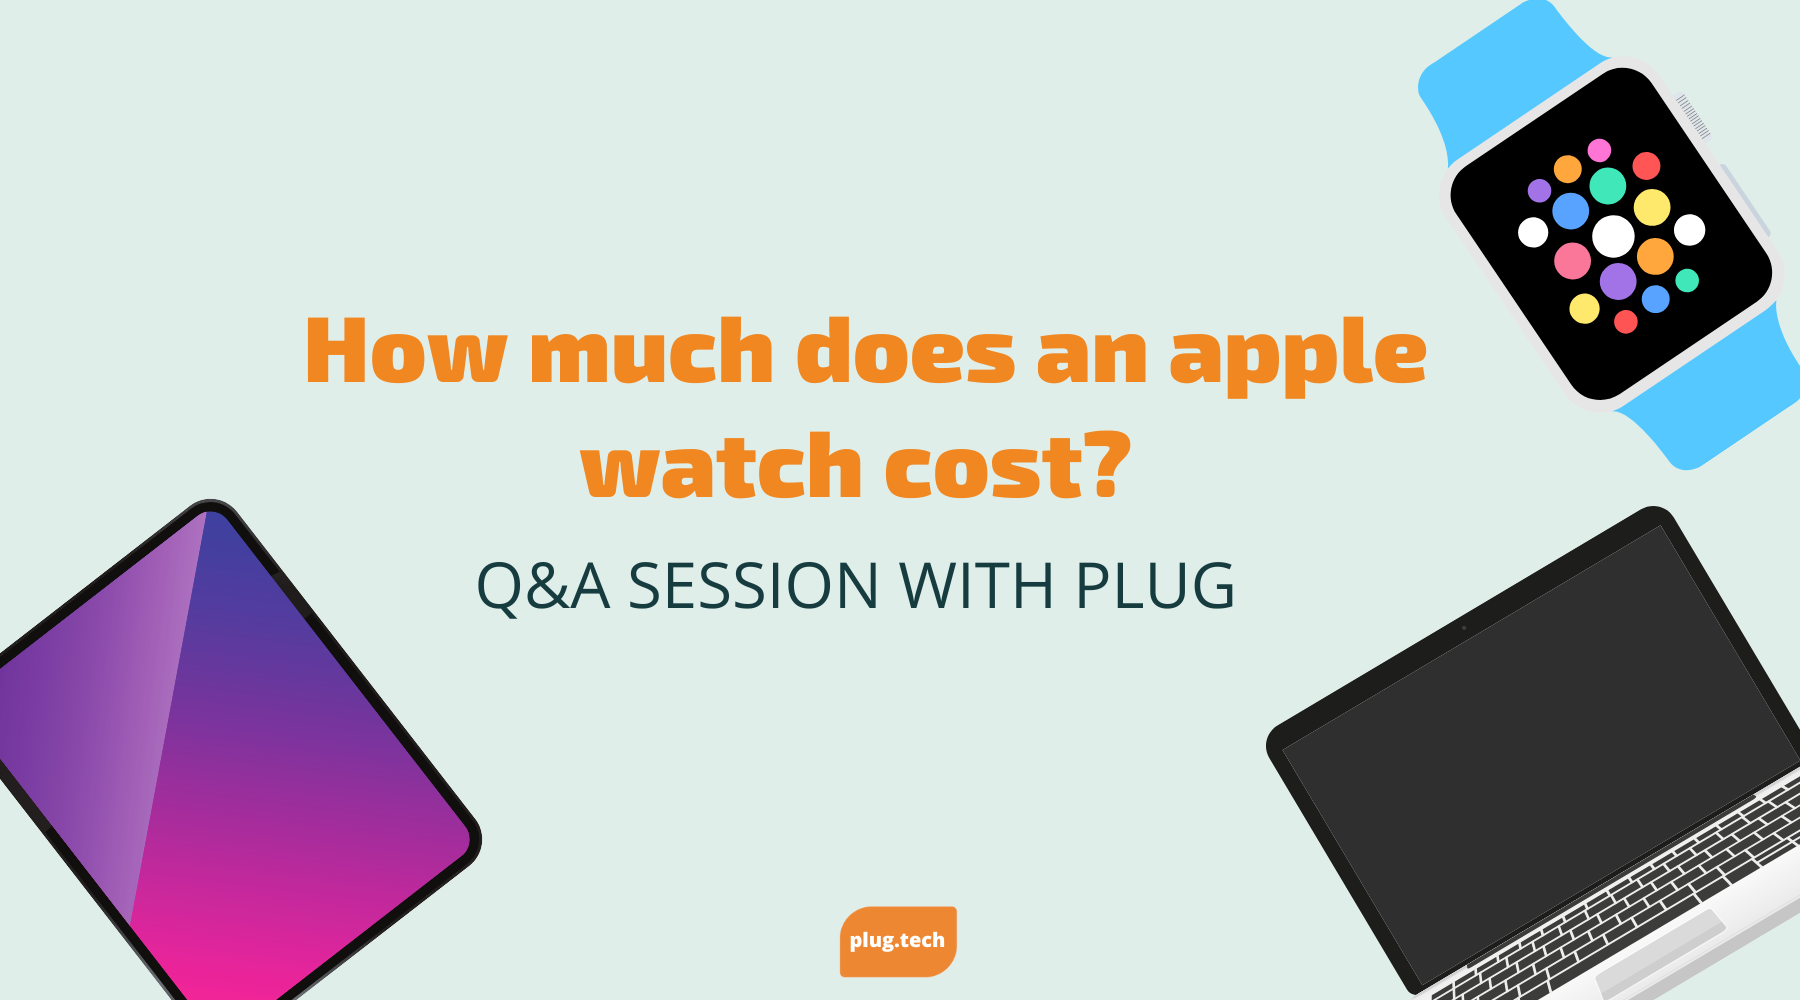 How much does an apple watch cost?